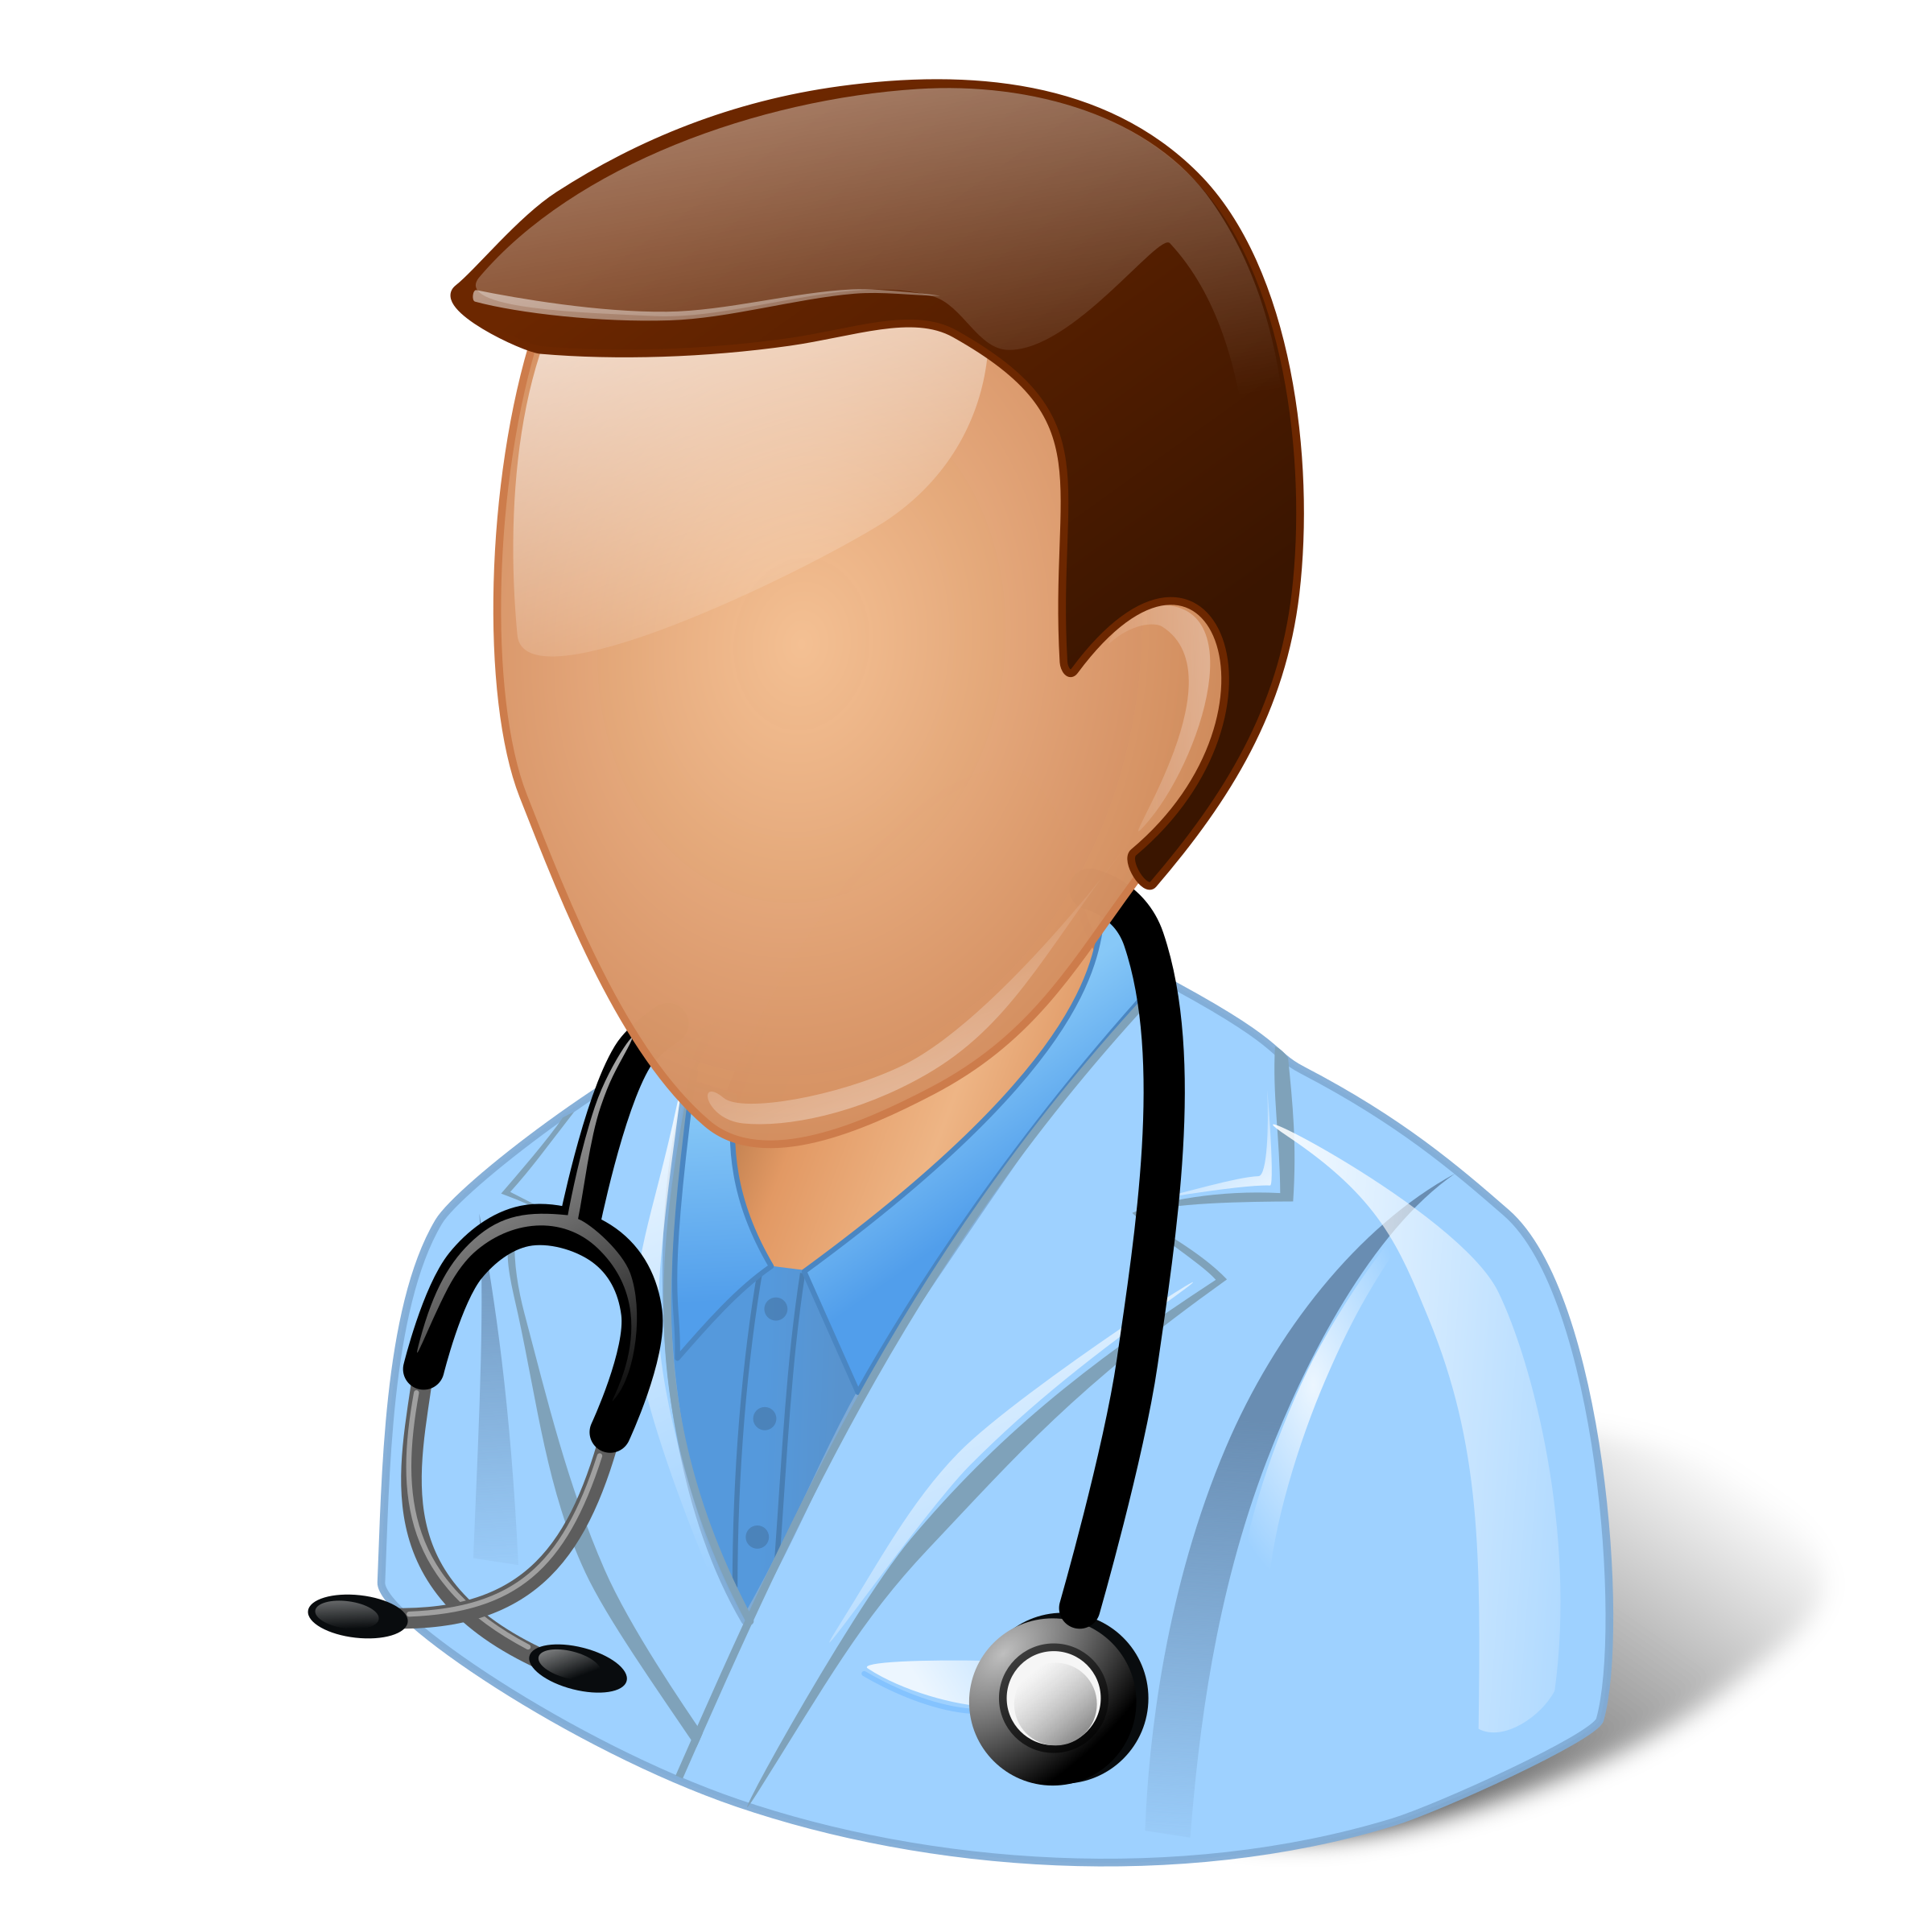 Professional clipart medical professional. Doctor clip art free